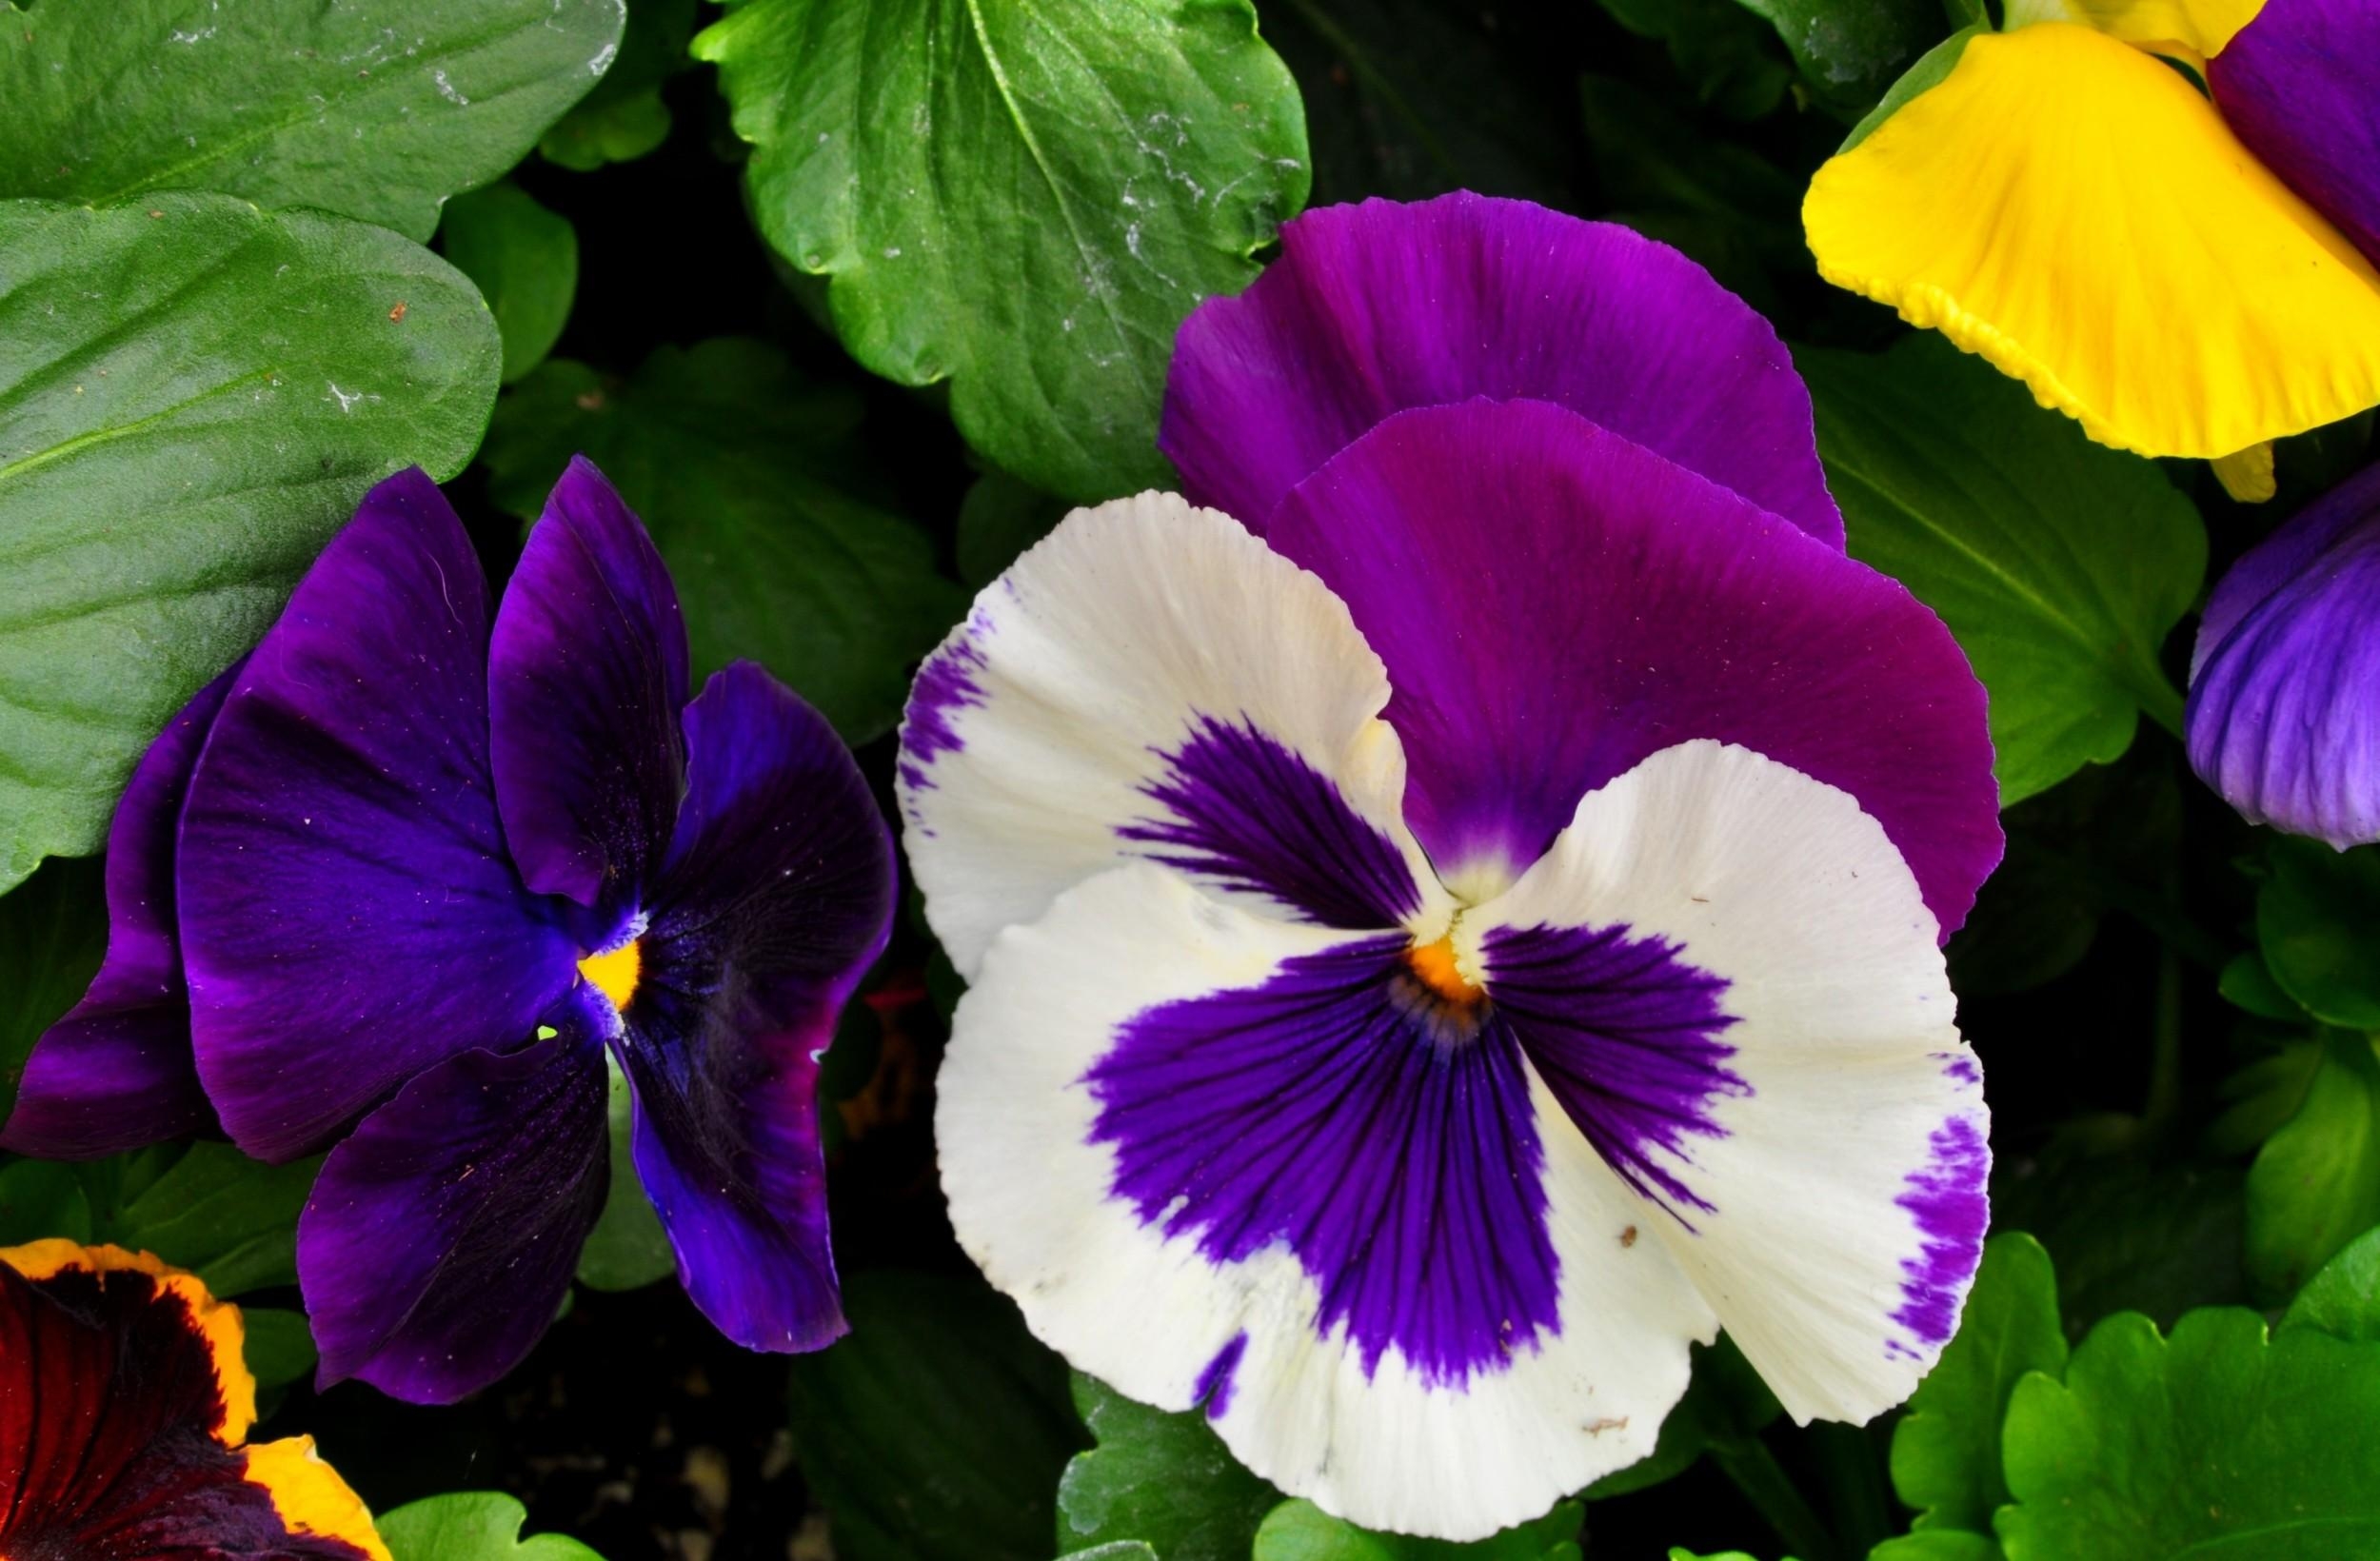 60843 download wallpaper flowers, pansies, bright, close-up, greens, flower bed, flowerbed screensavers and pictures for free